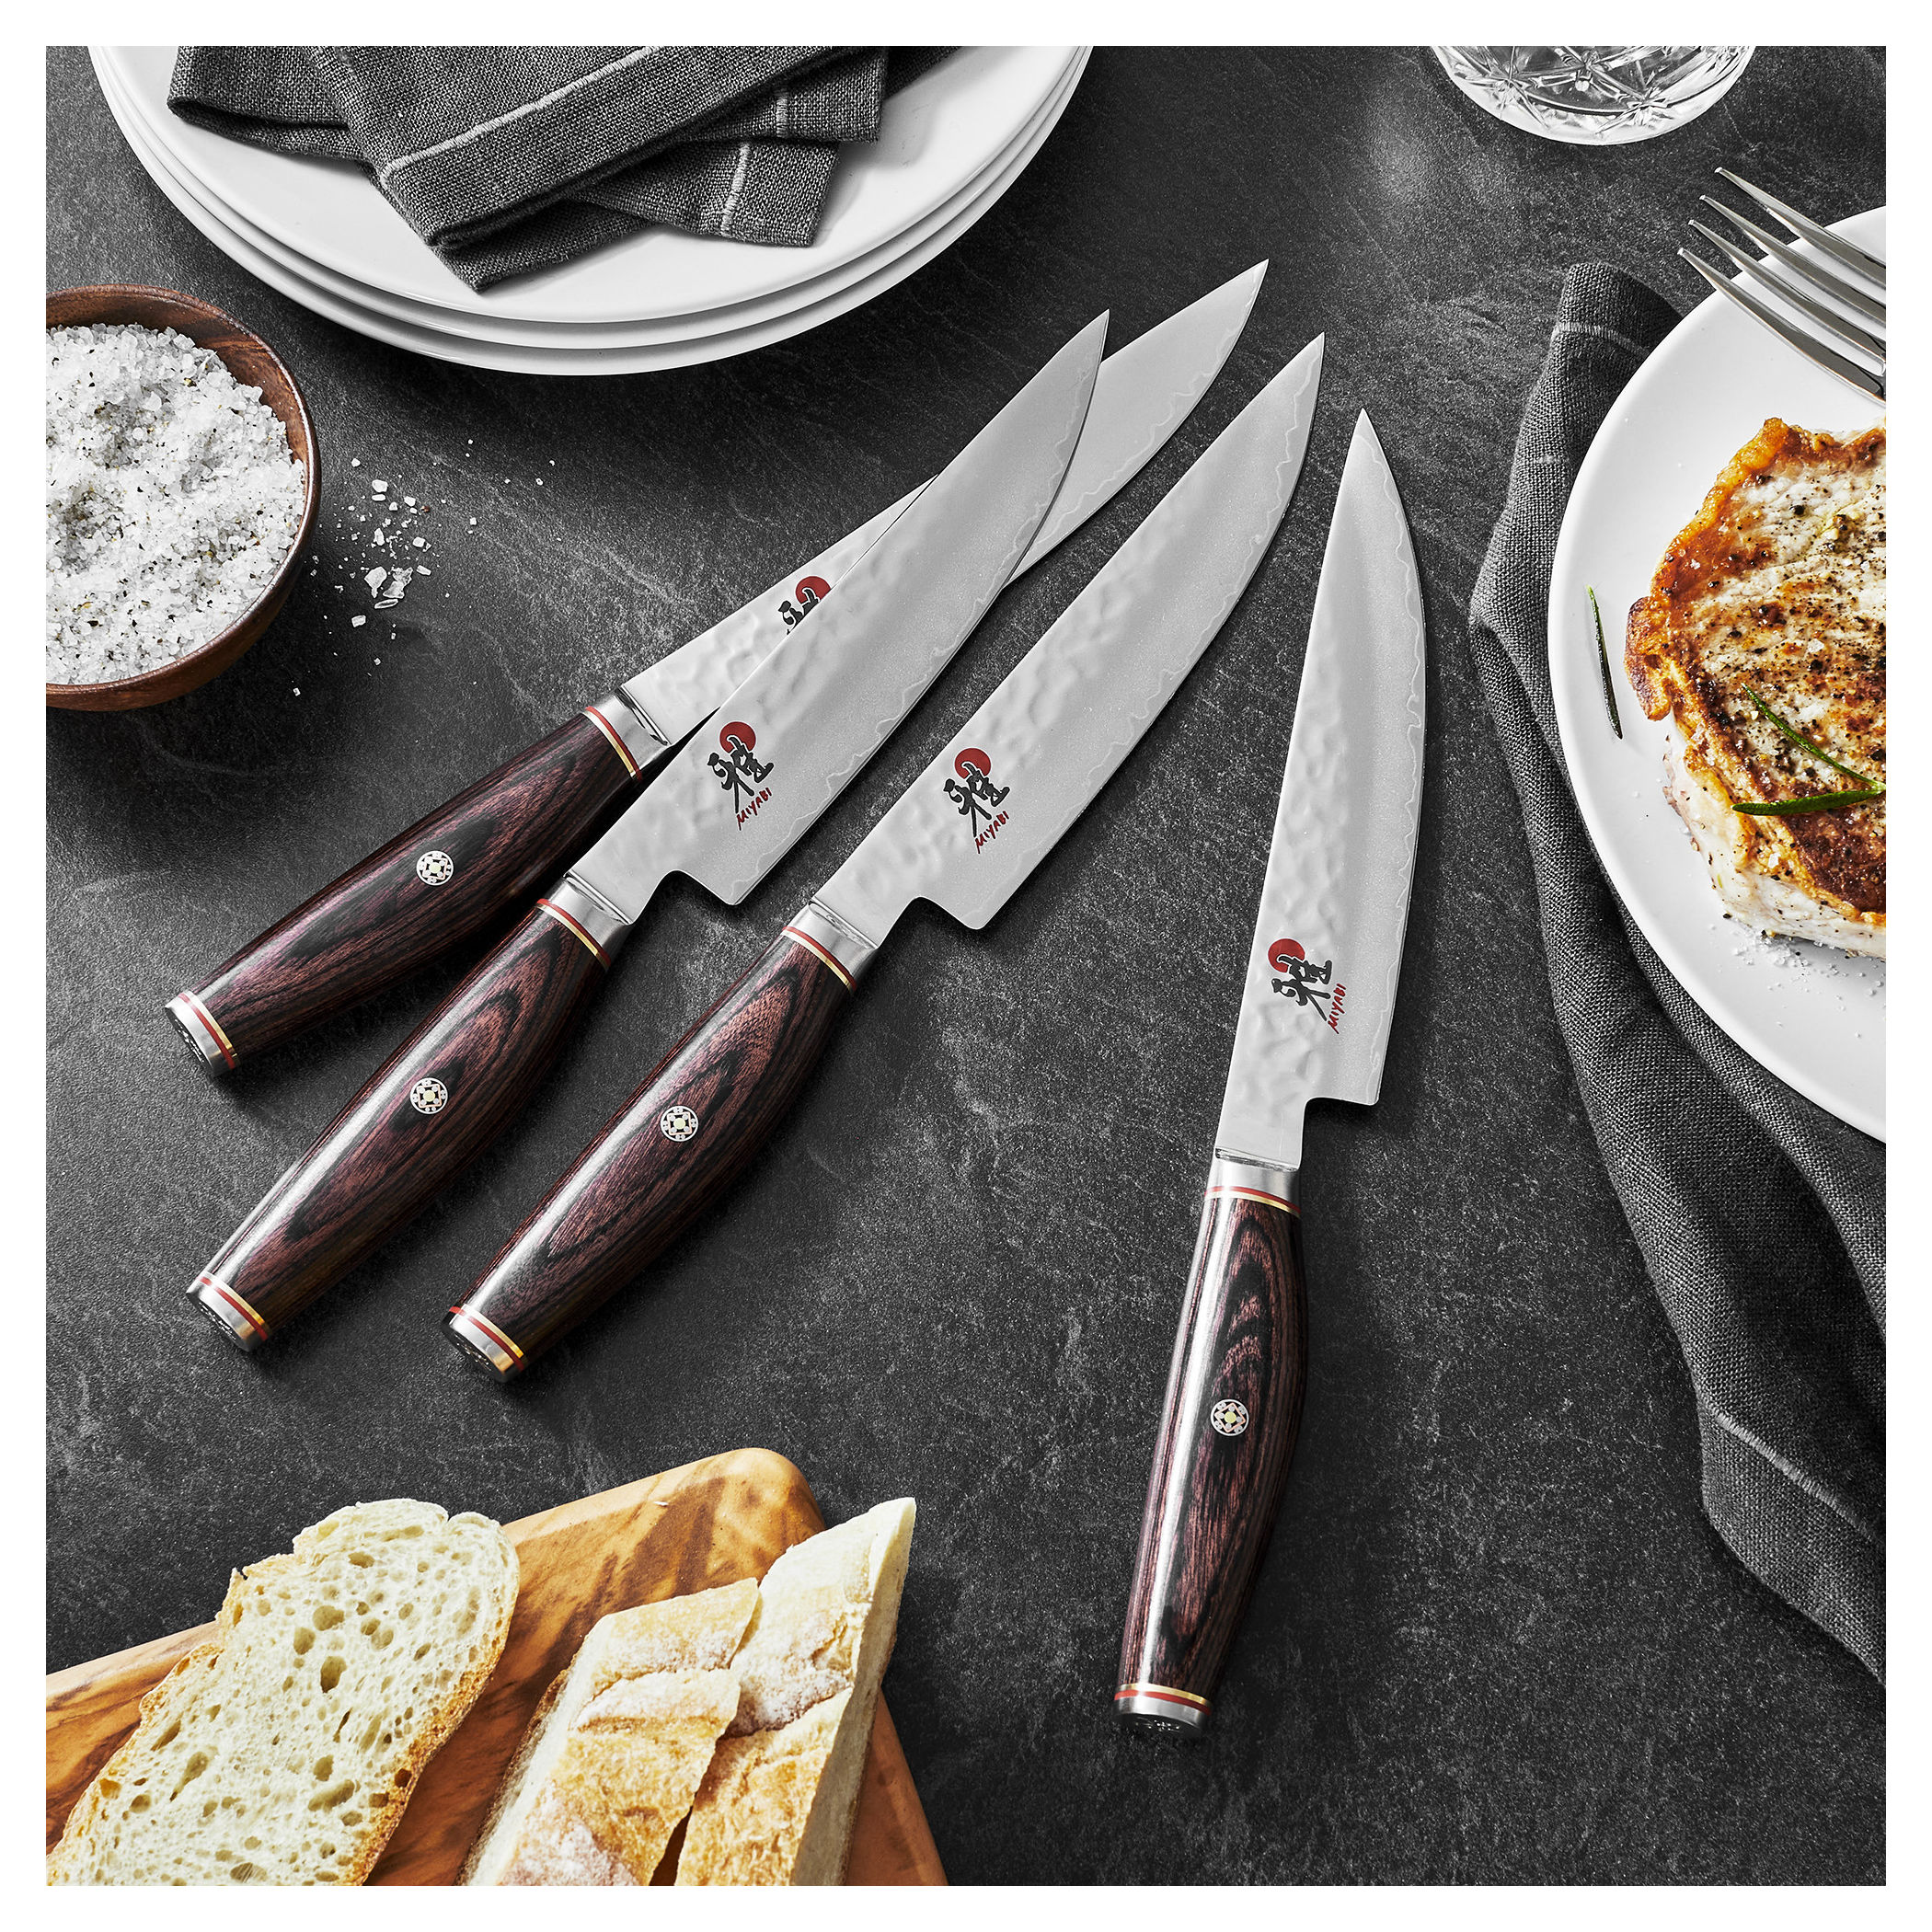 https://www.zwilling.com/on/demandware.static/-/Sites-zwilling-master-catalog/default/dw4b725a1e/images/large/750041732.jpg